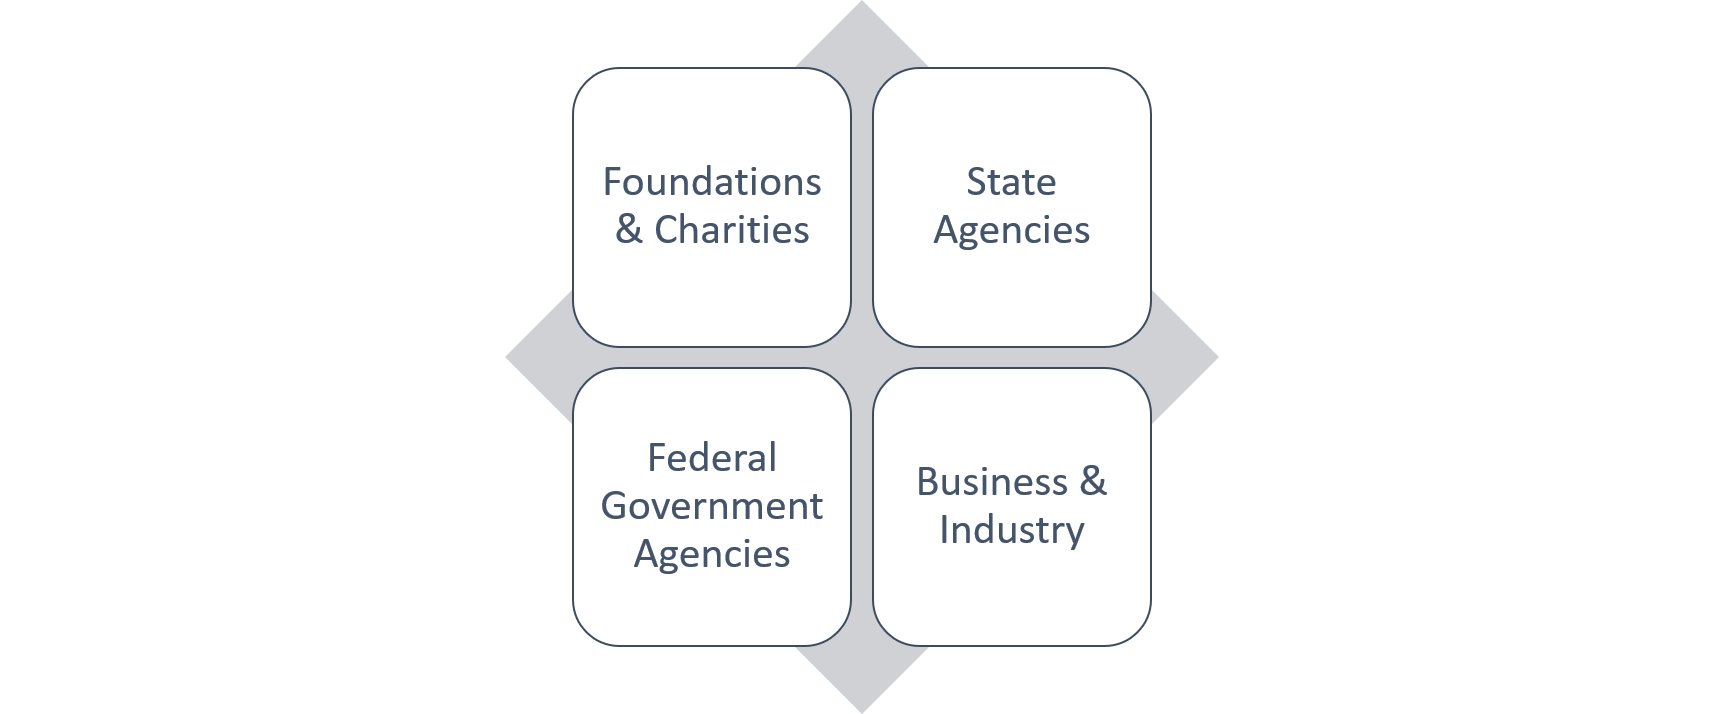 connection between external funding sources including foundations and charities, state agencies, federal government agencies, business and industry